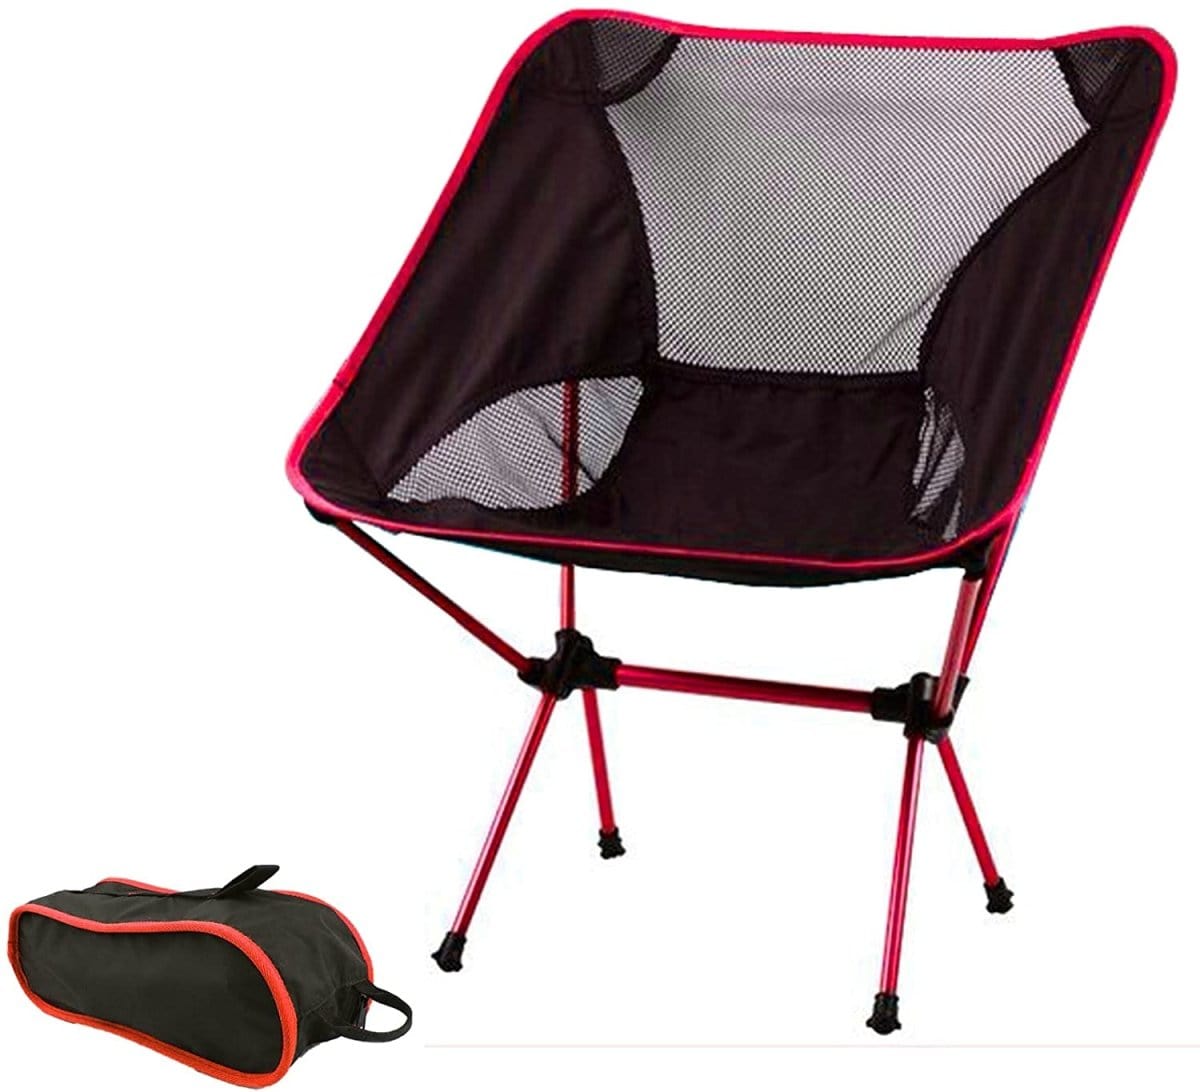 Ultralight Aluminum Alloy Folding Camping Camp Chair Outdoor Hiking Patio Backpacking Full Blue